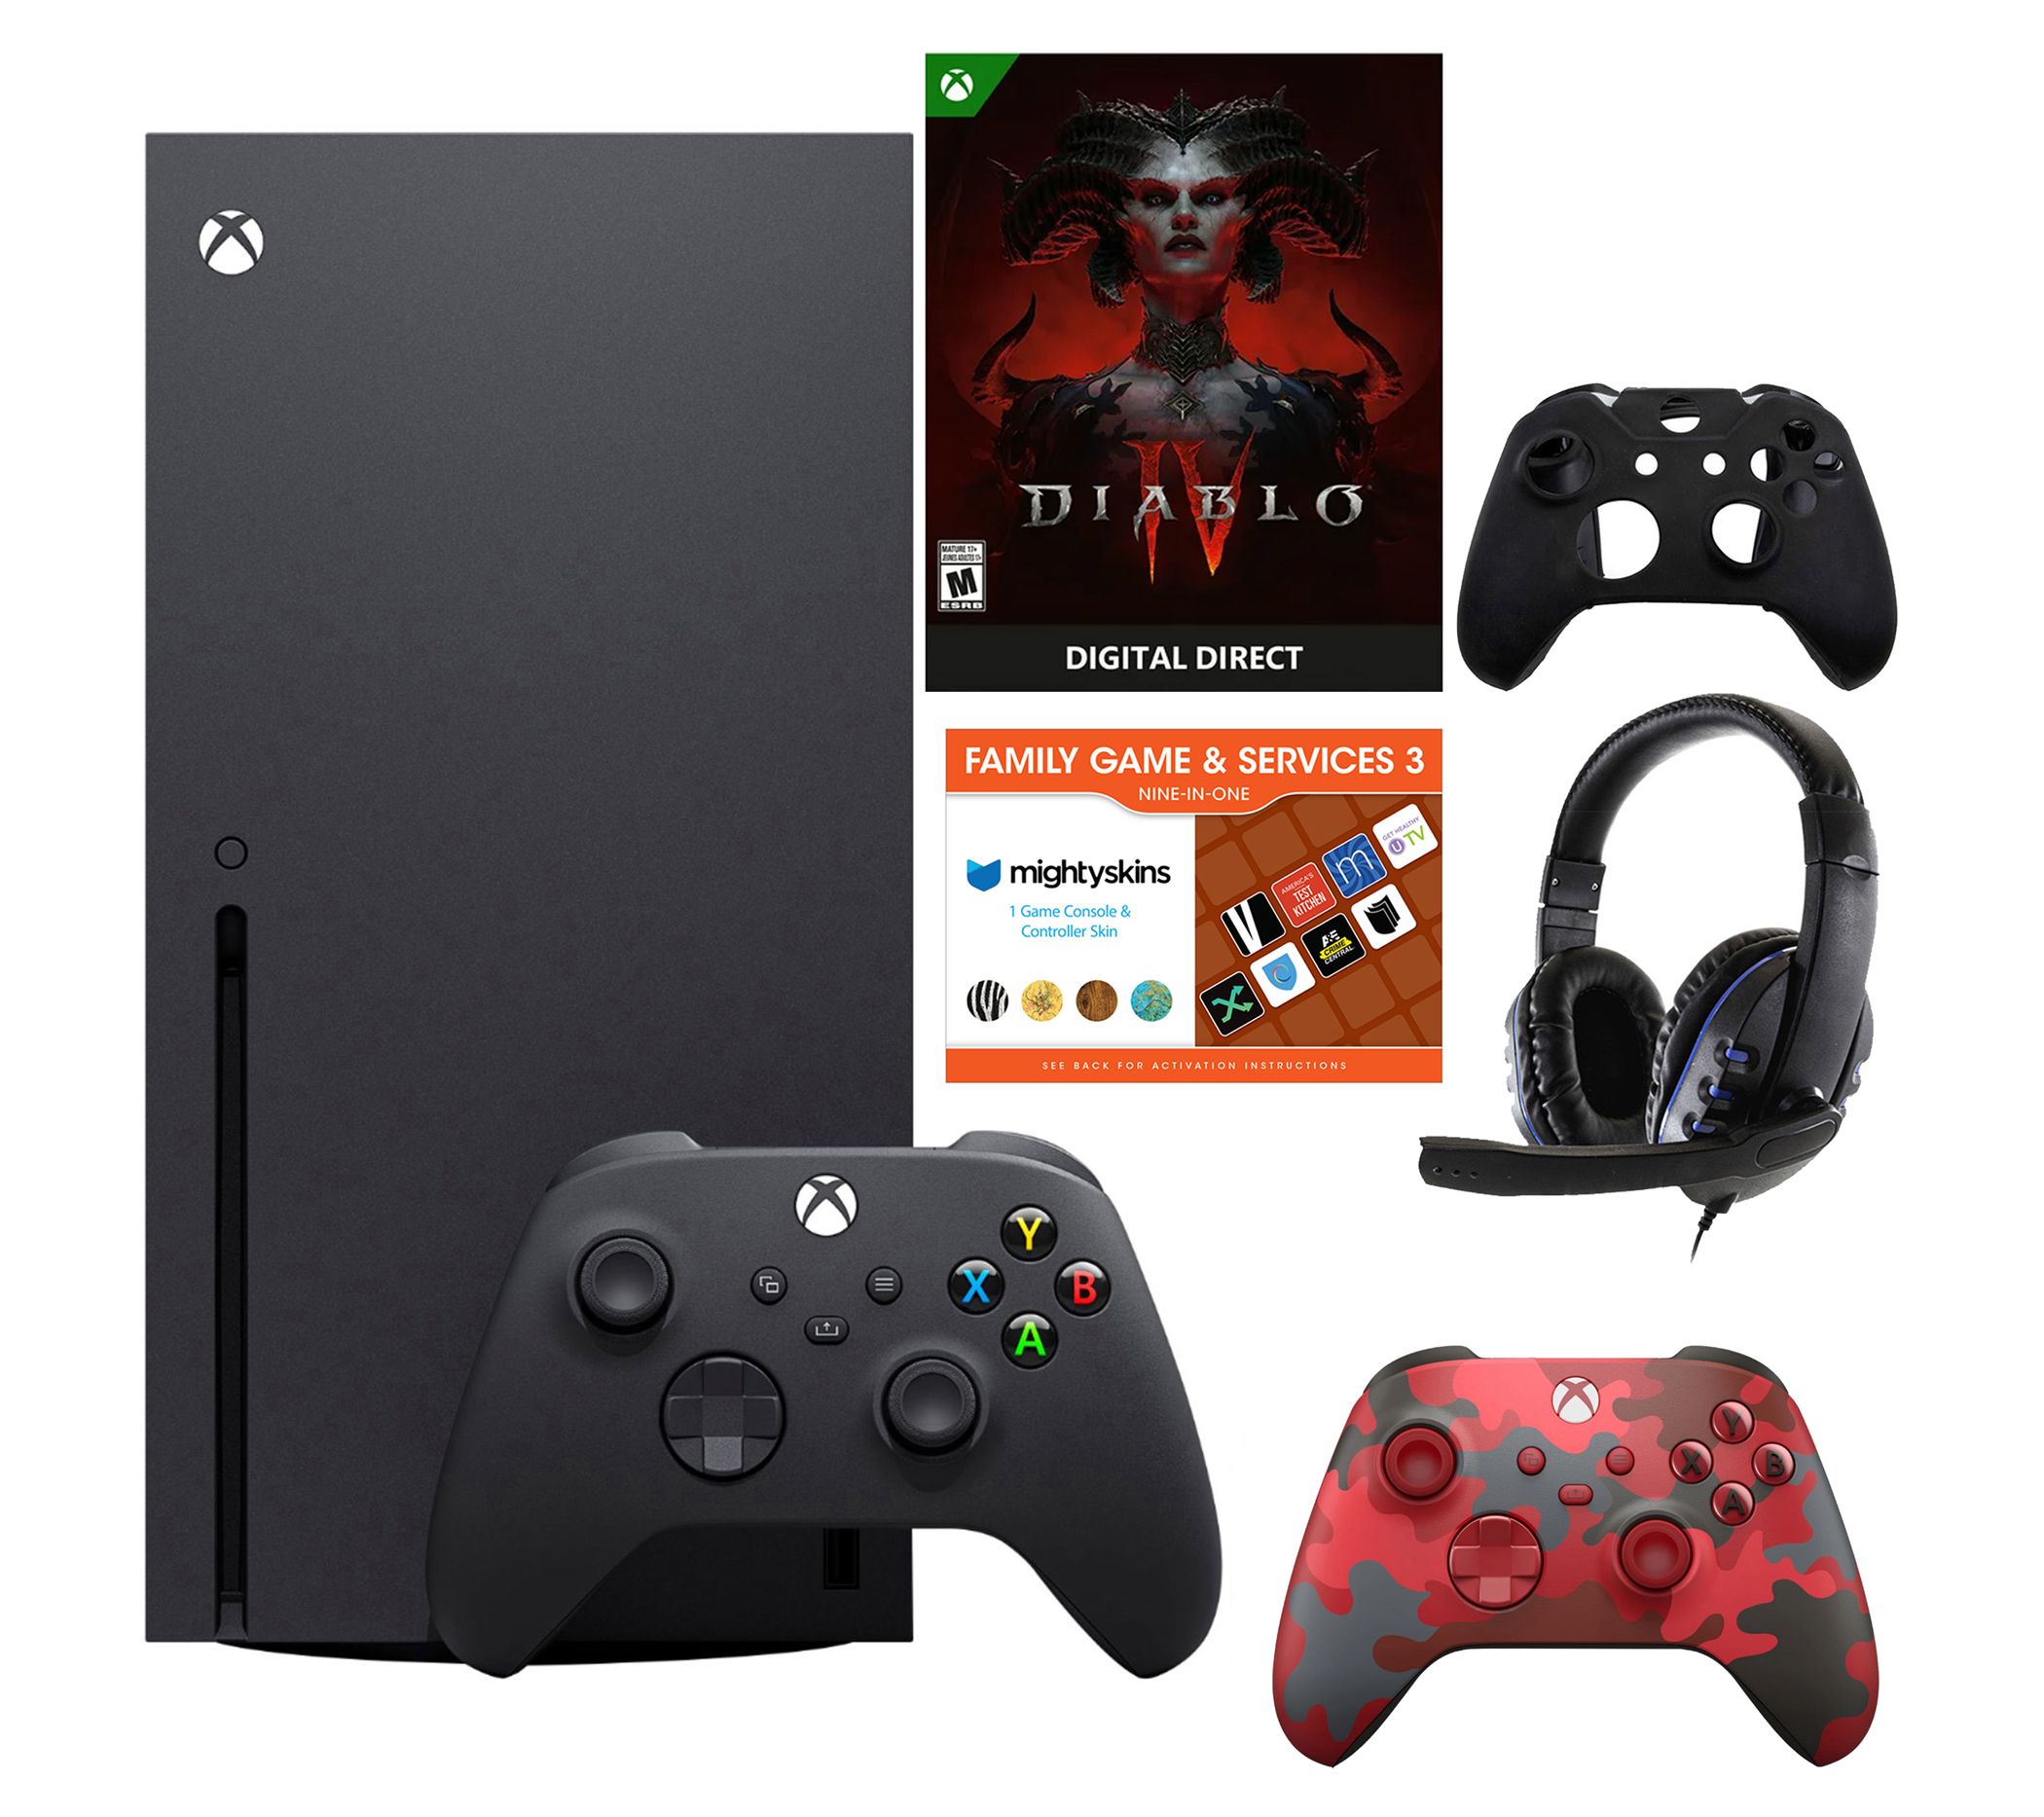 Xbox Series X 1TB Console with Accessories Kit and Mega Voucher - 20428660, HSN